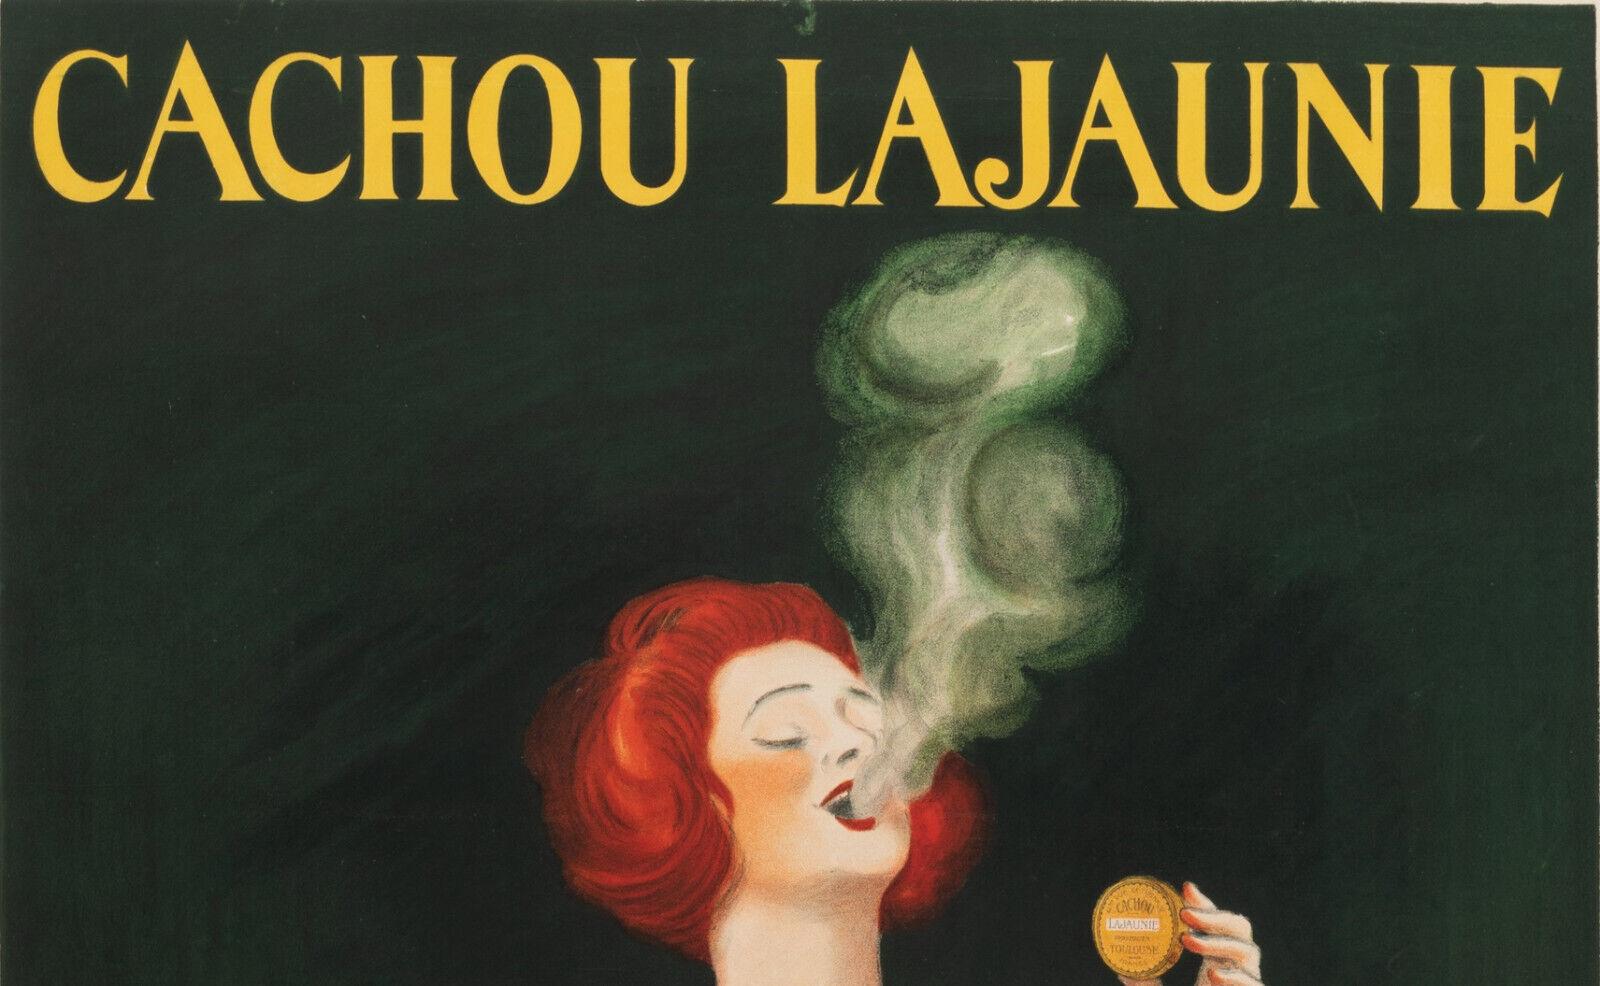 Original Vintage Poster for Cachou Lajaunie by Leonetto Cappiello dating from 1920.

Cachou Lajaunie is a liquorice based sweet candy.

A red-haired woman in a dress of feathers in autumnal colors holds a box of Cachou Lajaunie.

Leonetto